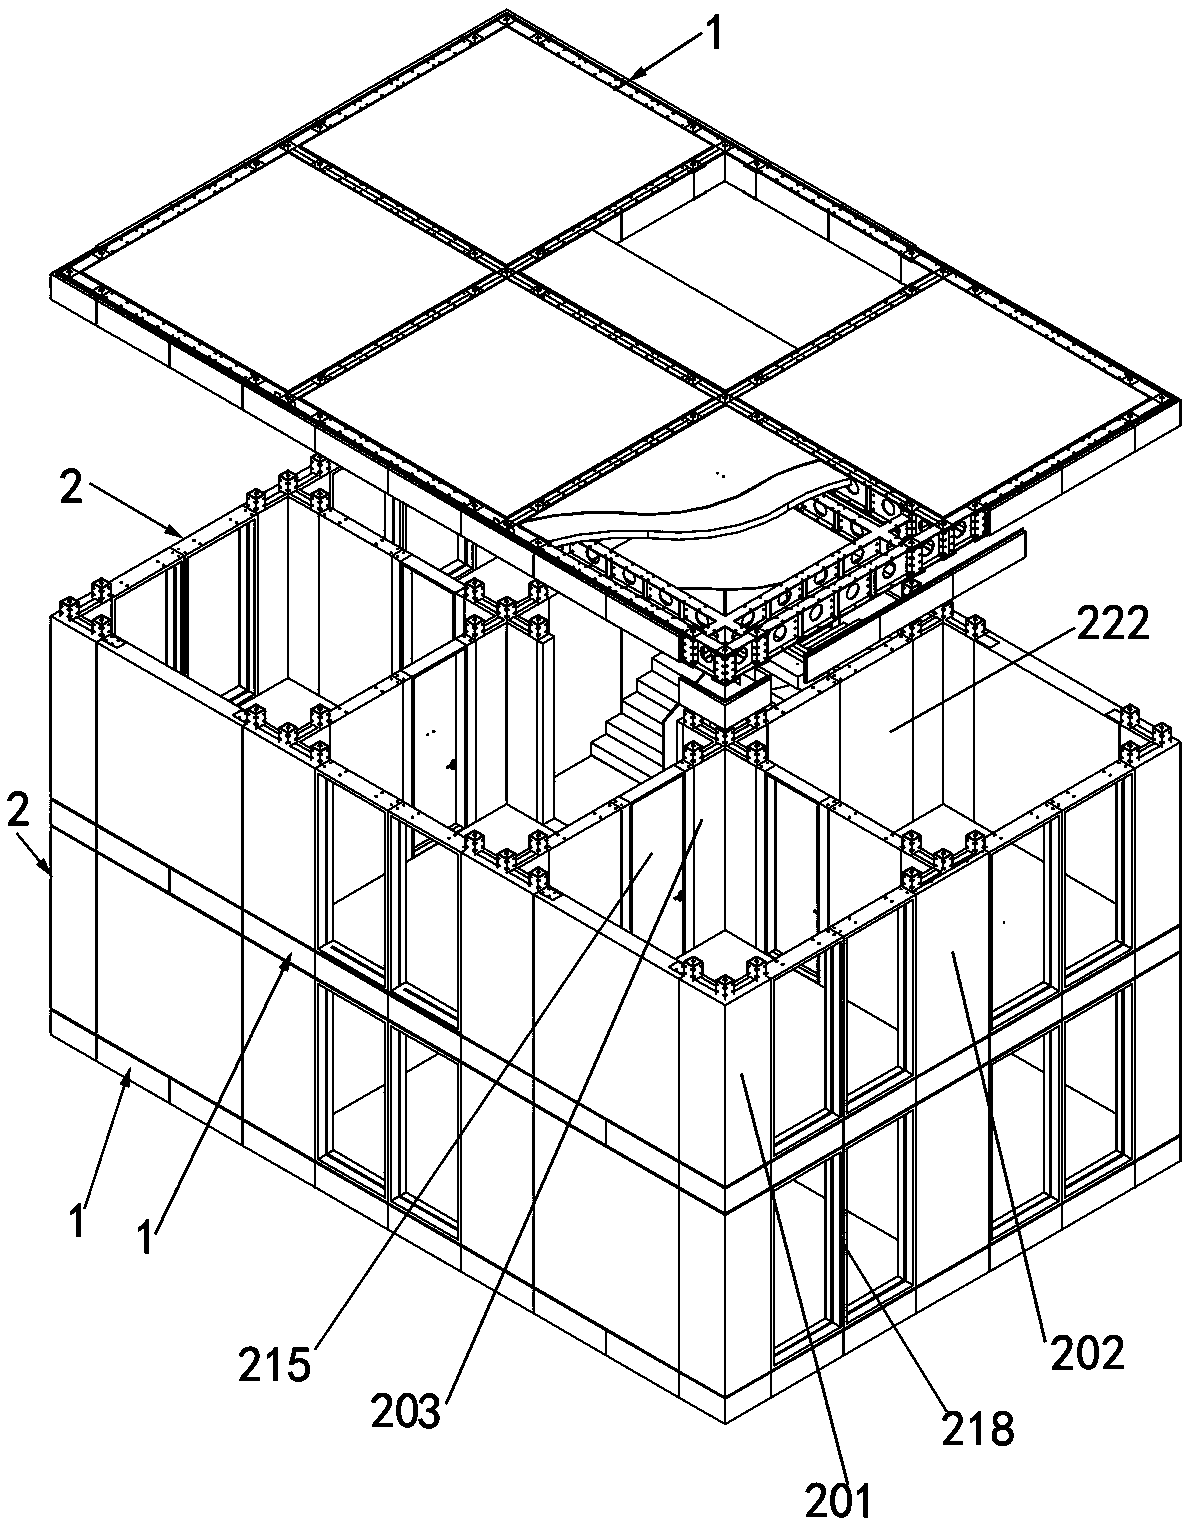 Environment-friendly and sustainable full-module fabricated building system and construction method